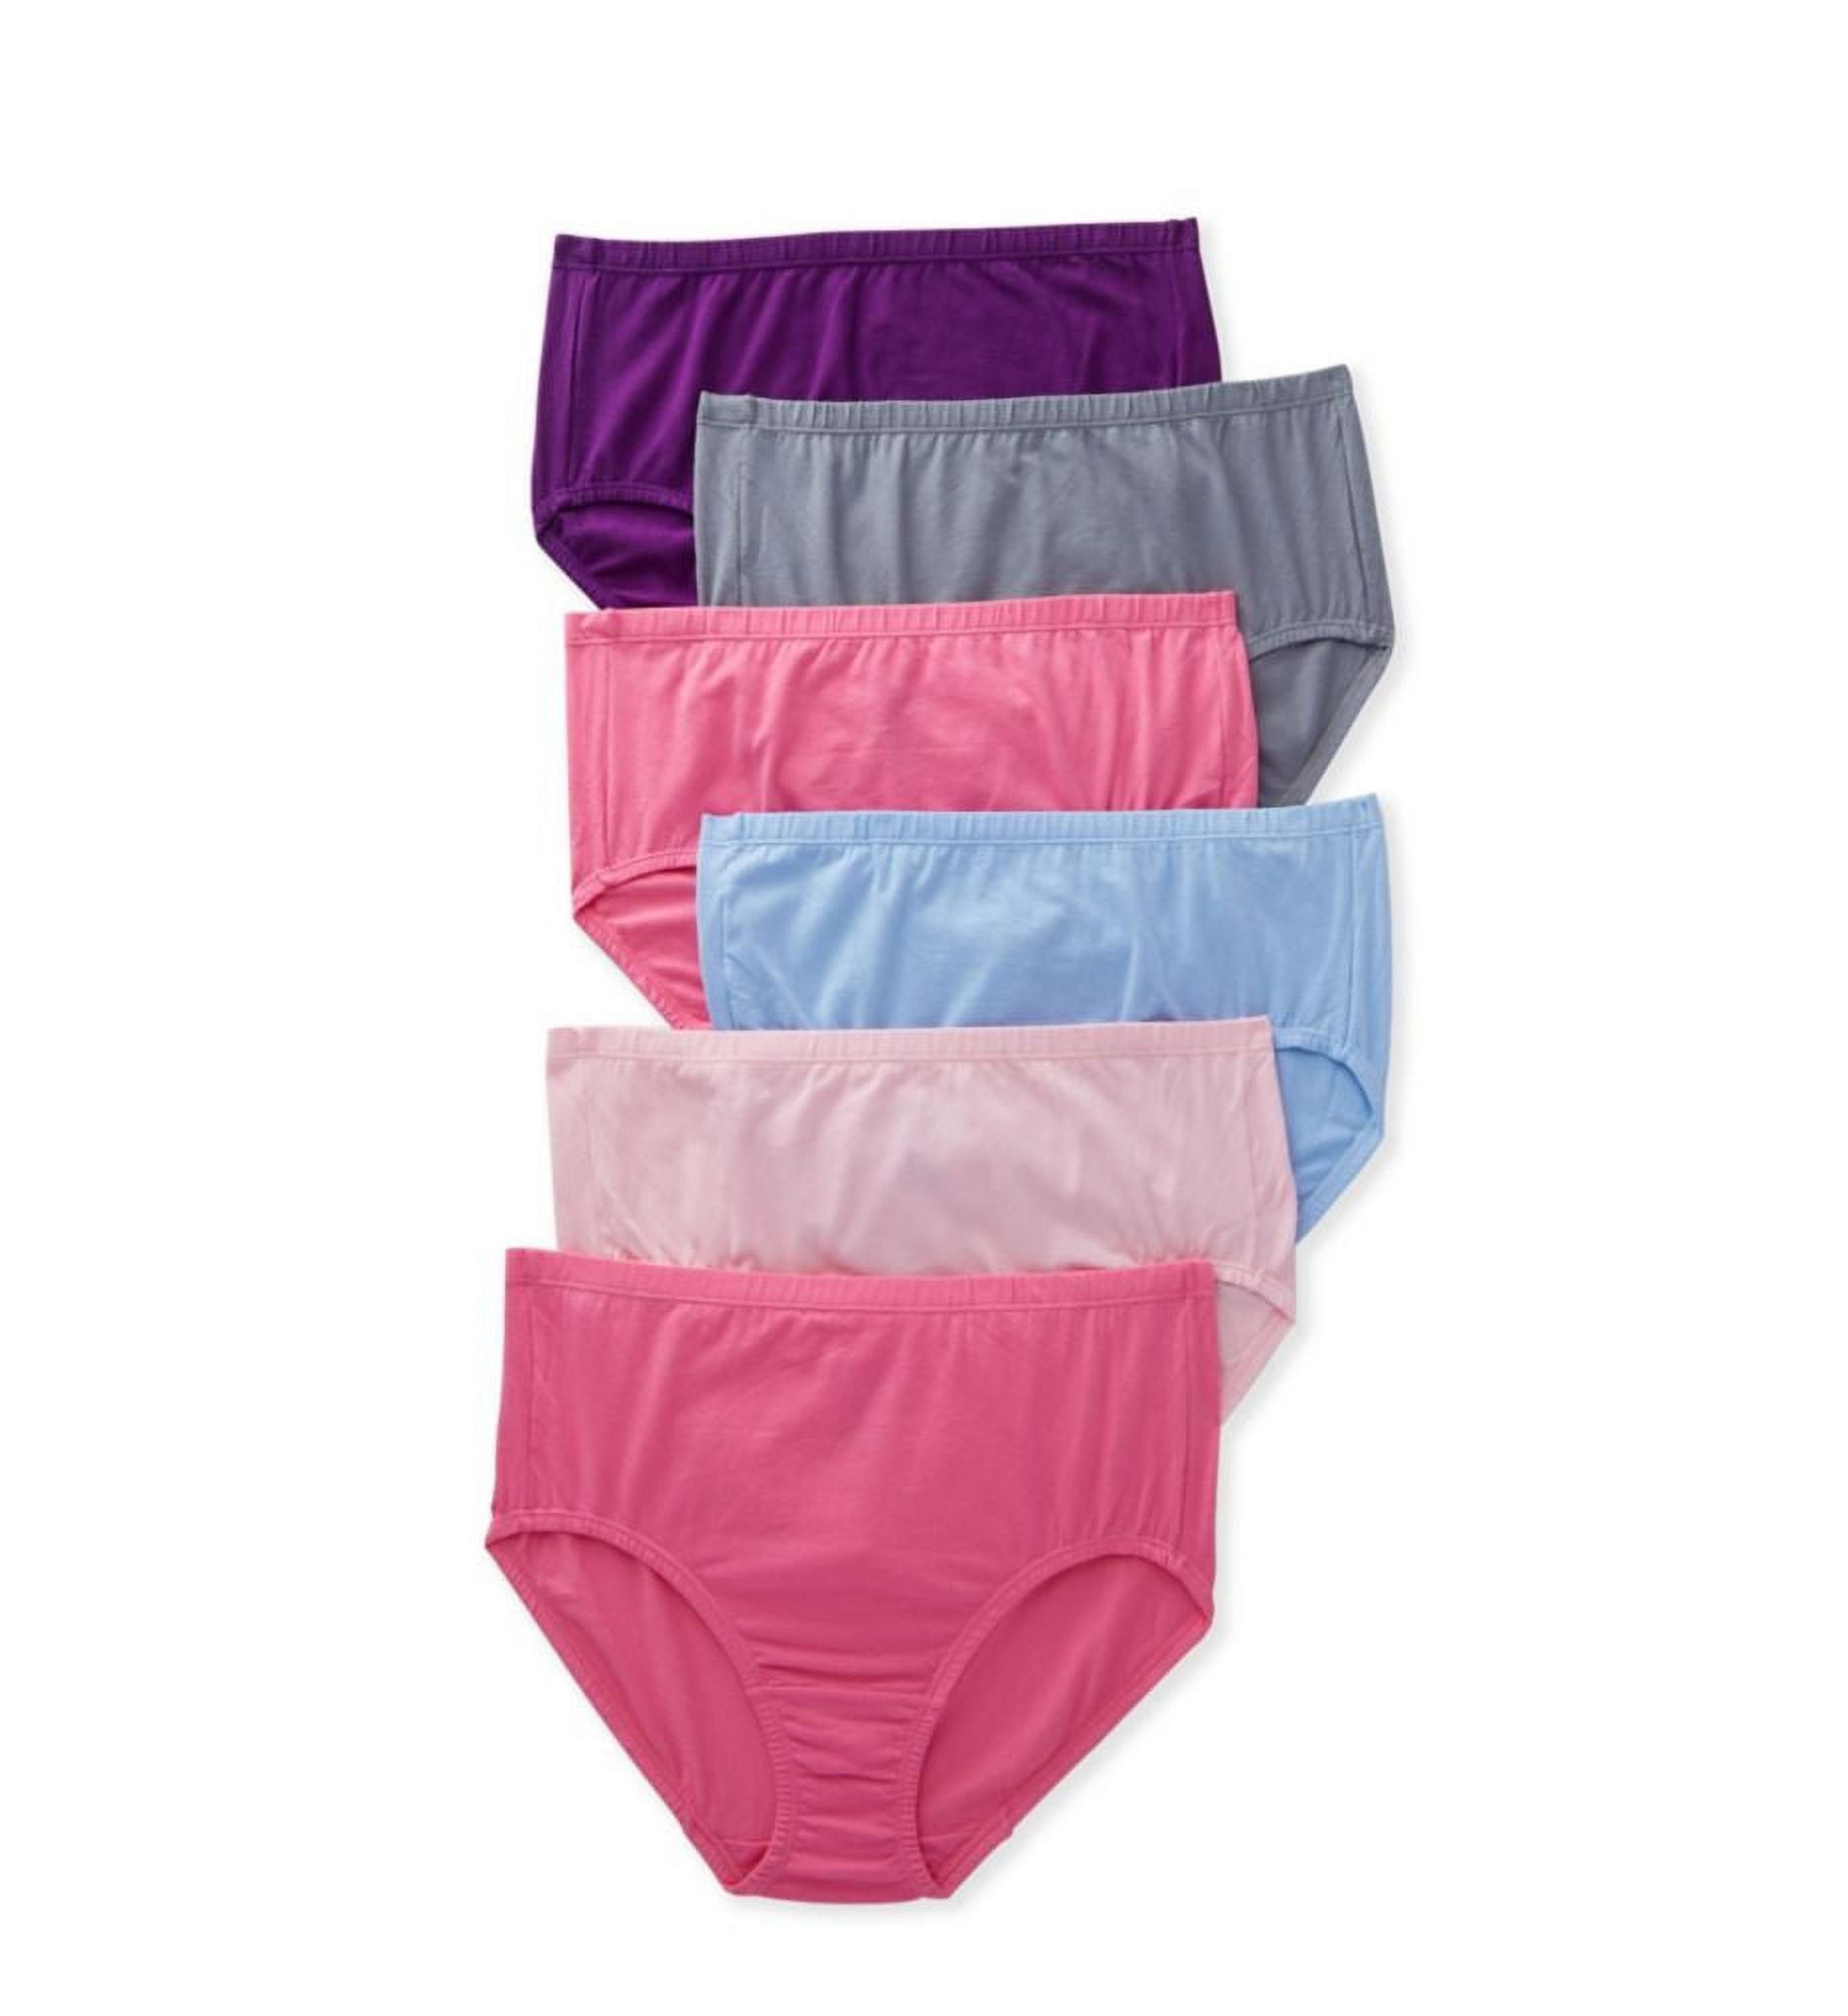 Fit for Me by Fruit of the Loom Women's Plus Size Breathable Cotton-Mesh  Brief Underwear, 6 Pack